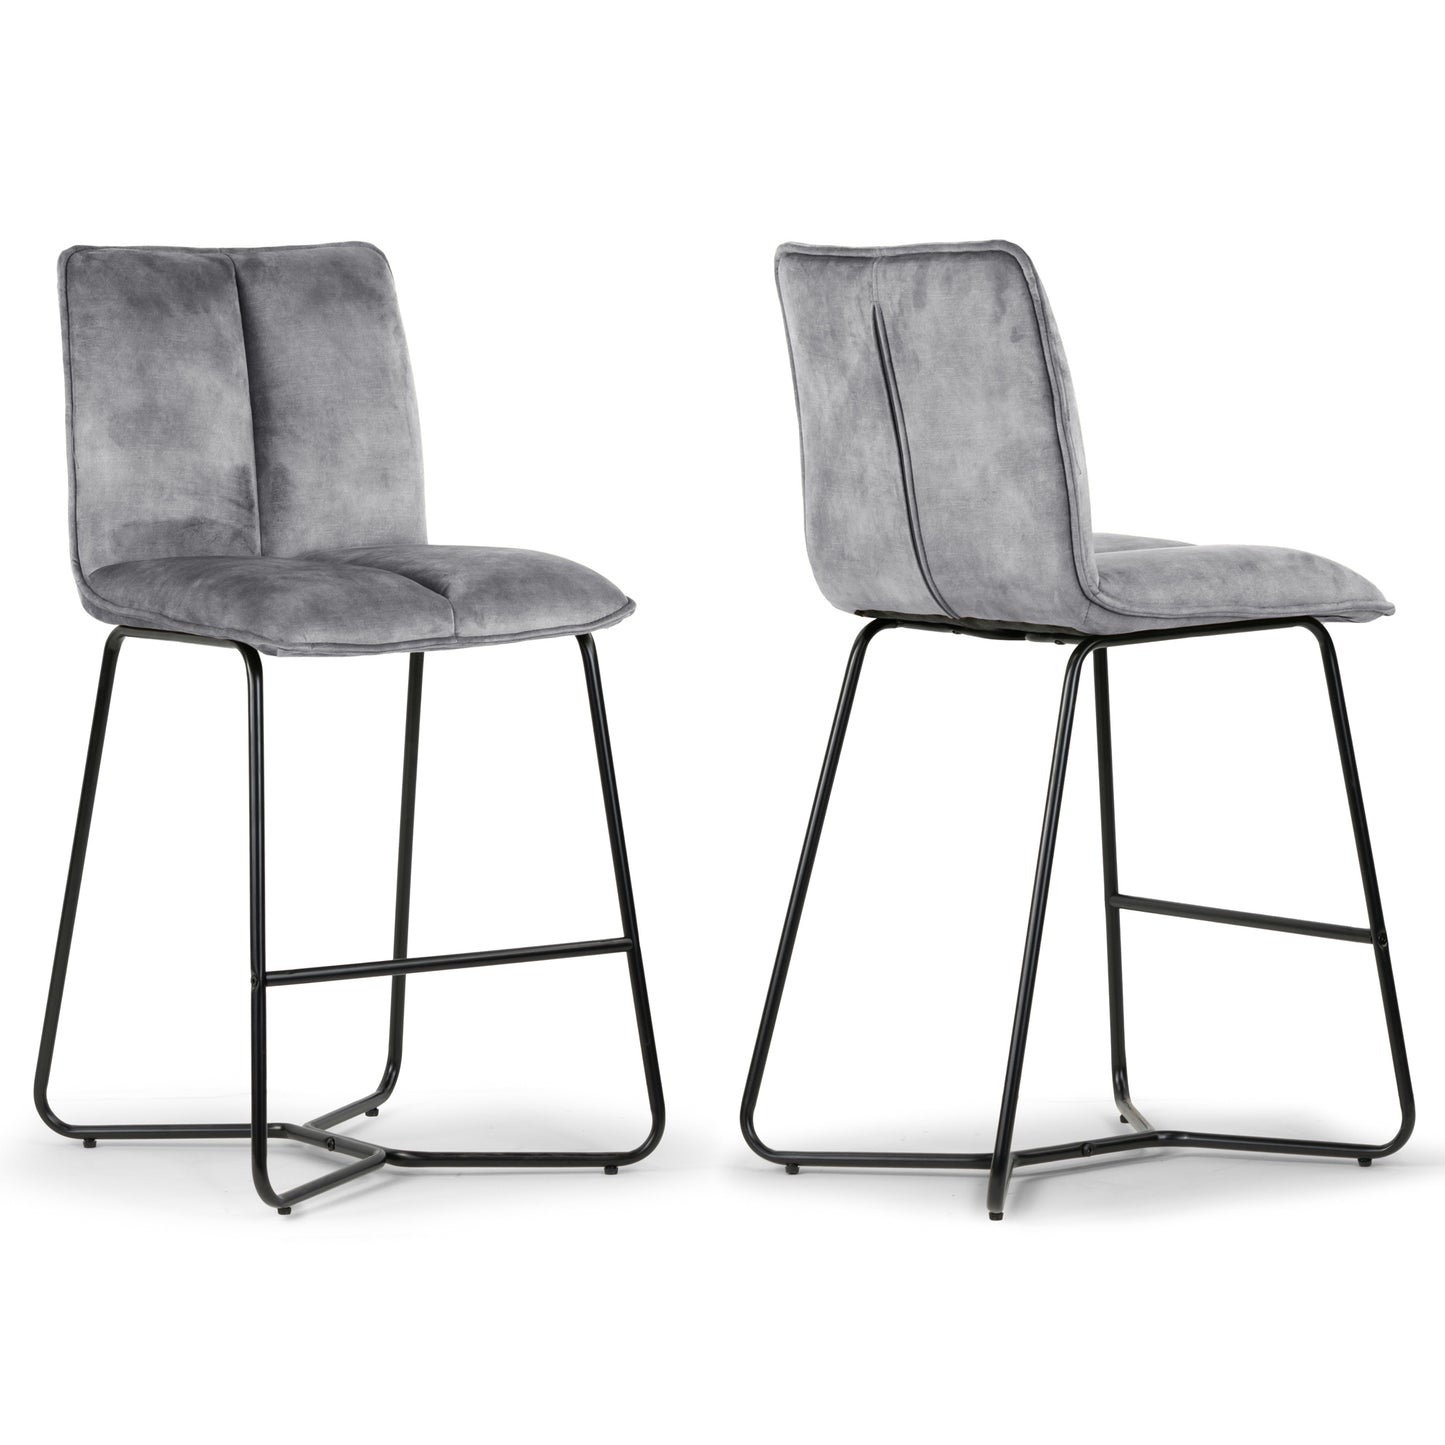 Set of 2 Avent Gray Fabric Counter Stool with Black Metal Legs